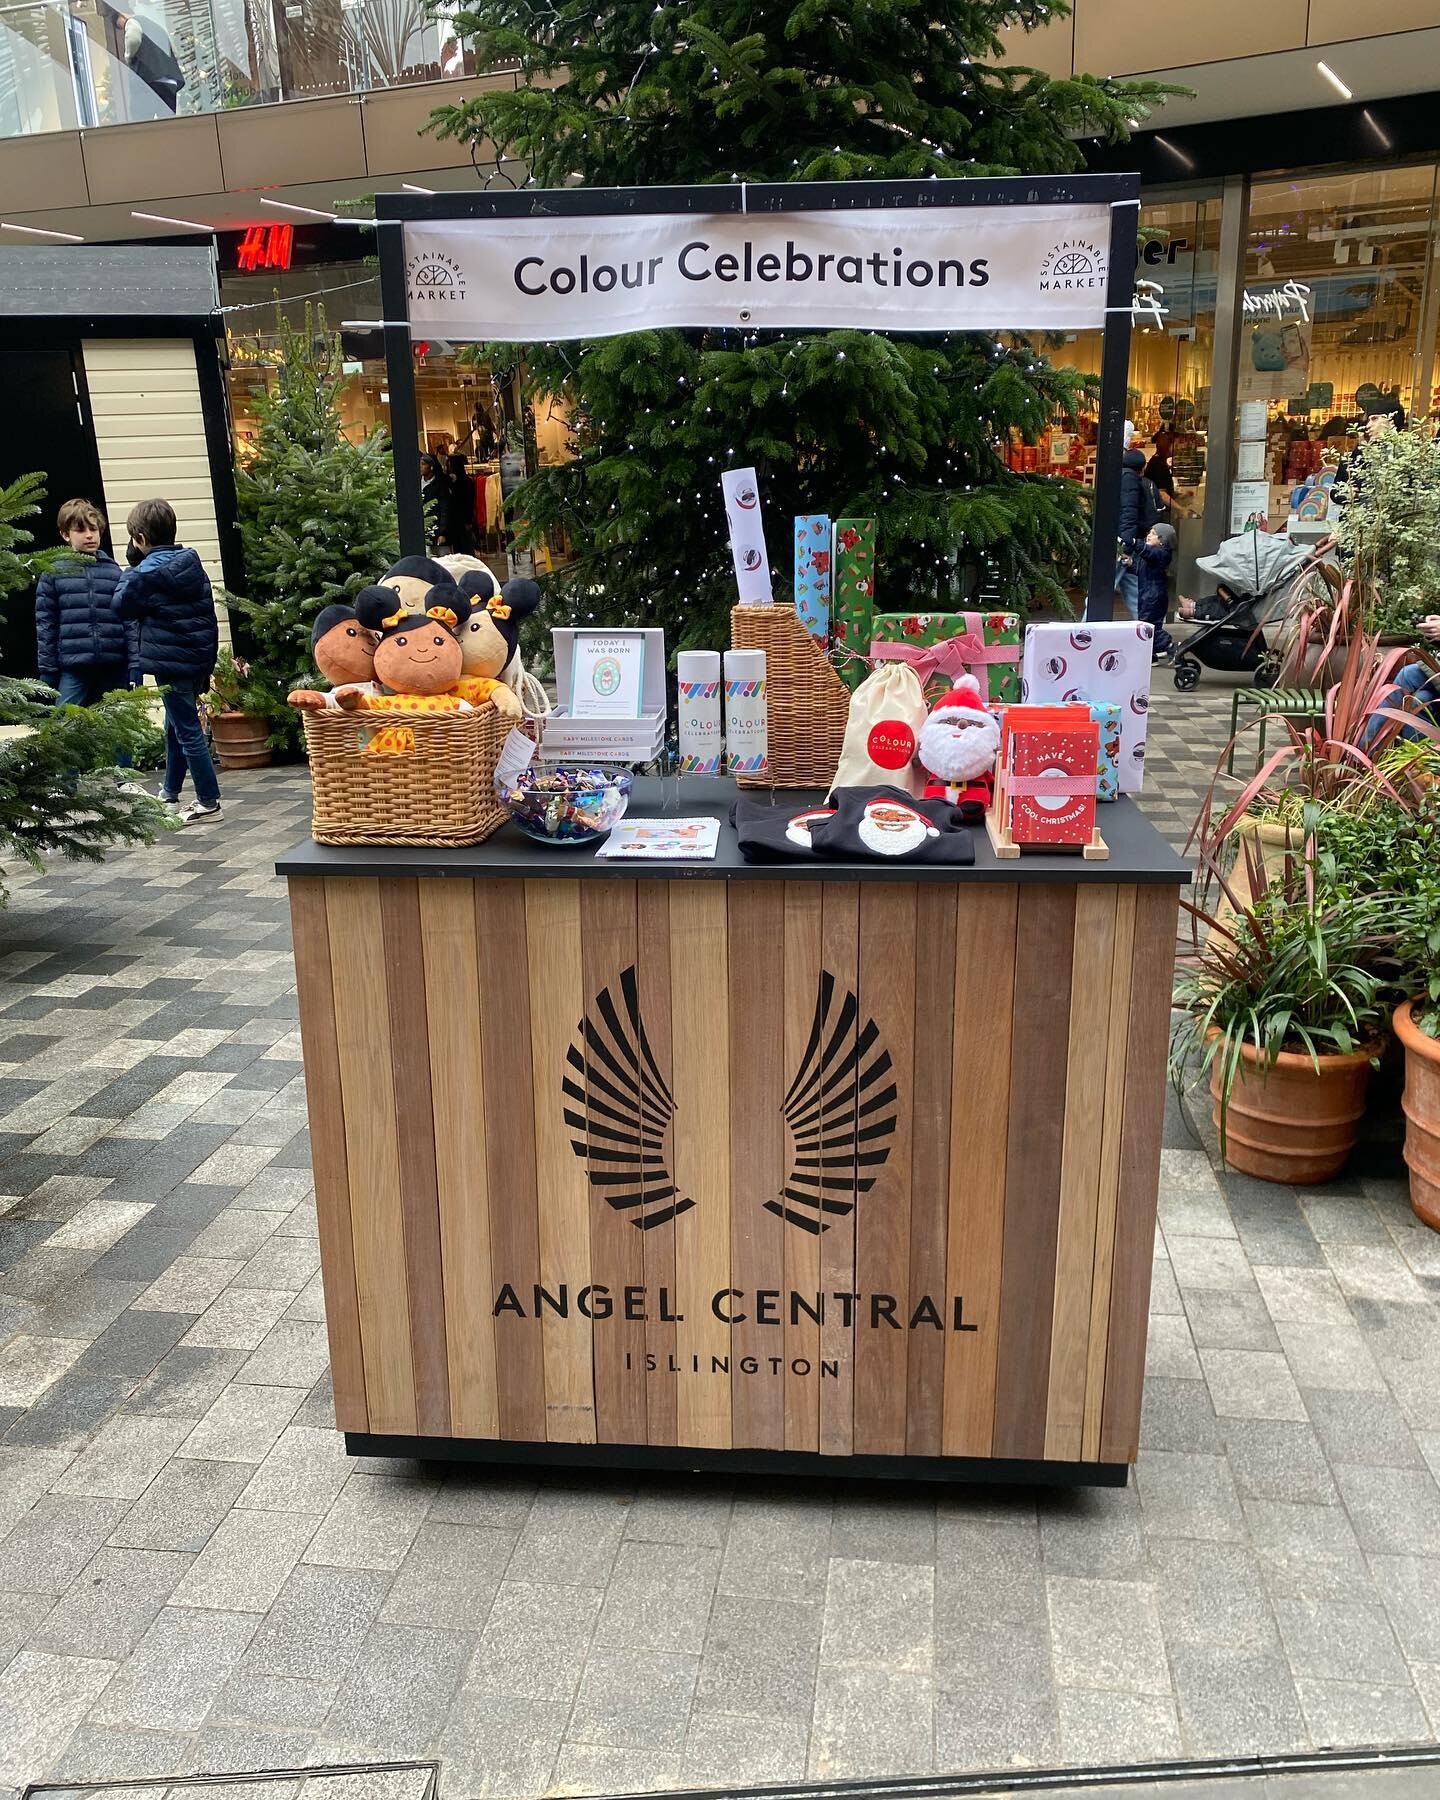 We&rsquo;re having a glorious time here at the @angel_central Christmas market today! So many wonderful people, Christmas carols and all round good vibes! We&rsquo;re here till 6pm so pop by and say hi! We&rsquo;d love to meet you! ❤️

#christmasmark